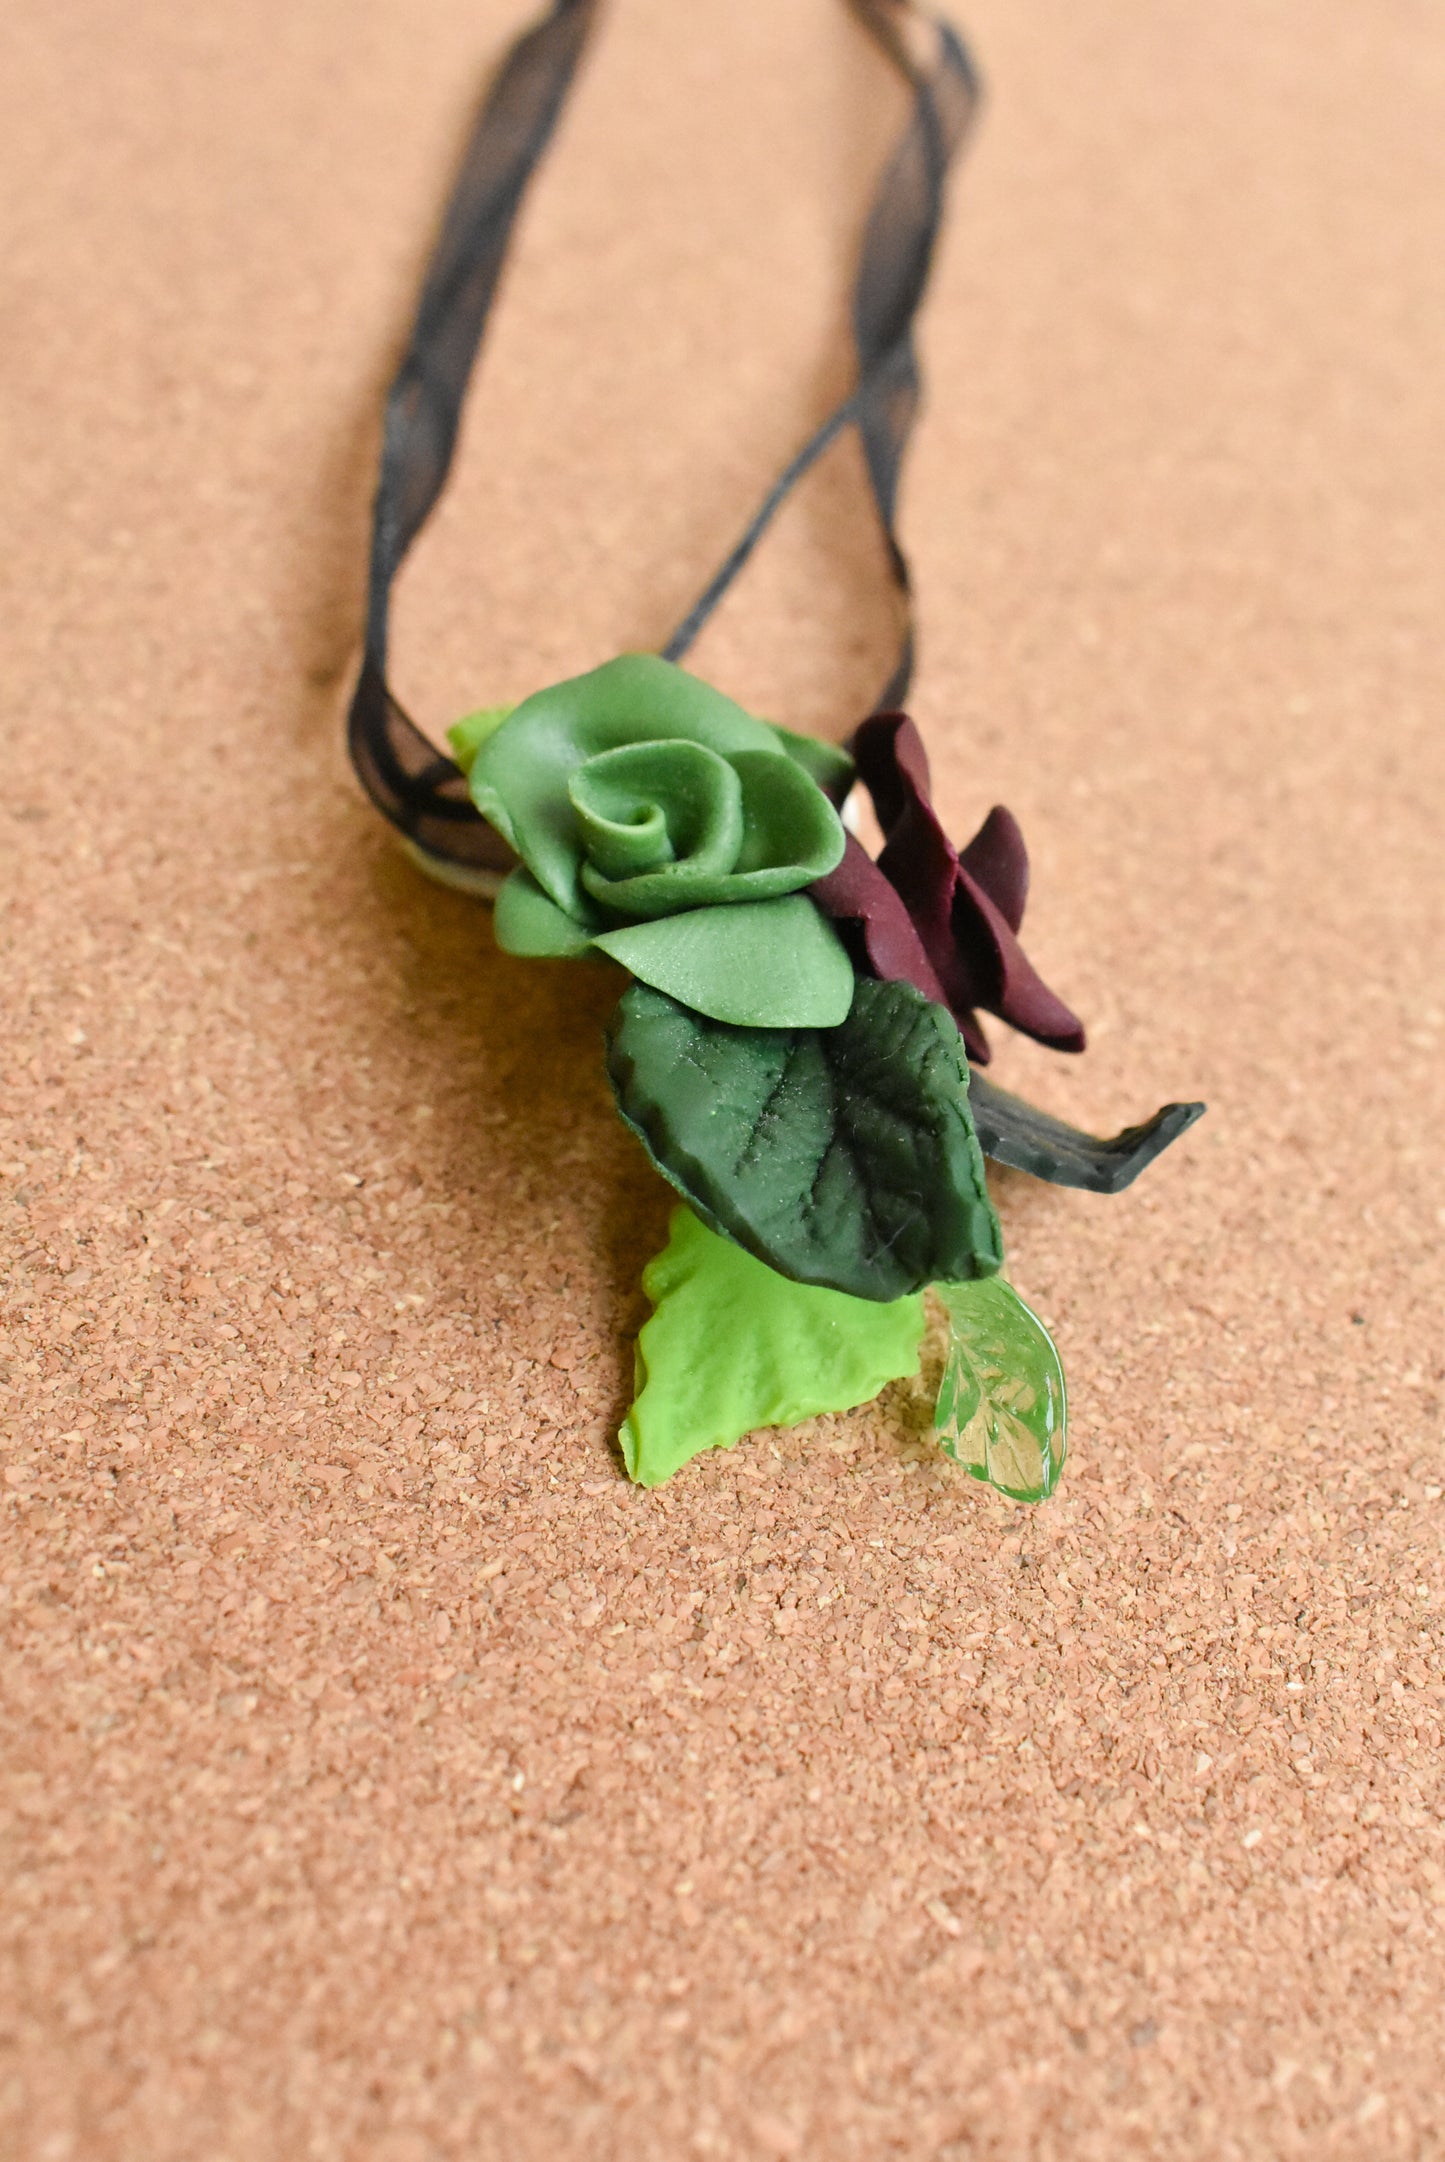 Ceramic flower ribbon necklace with green and purple flowers